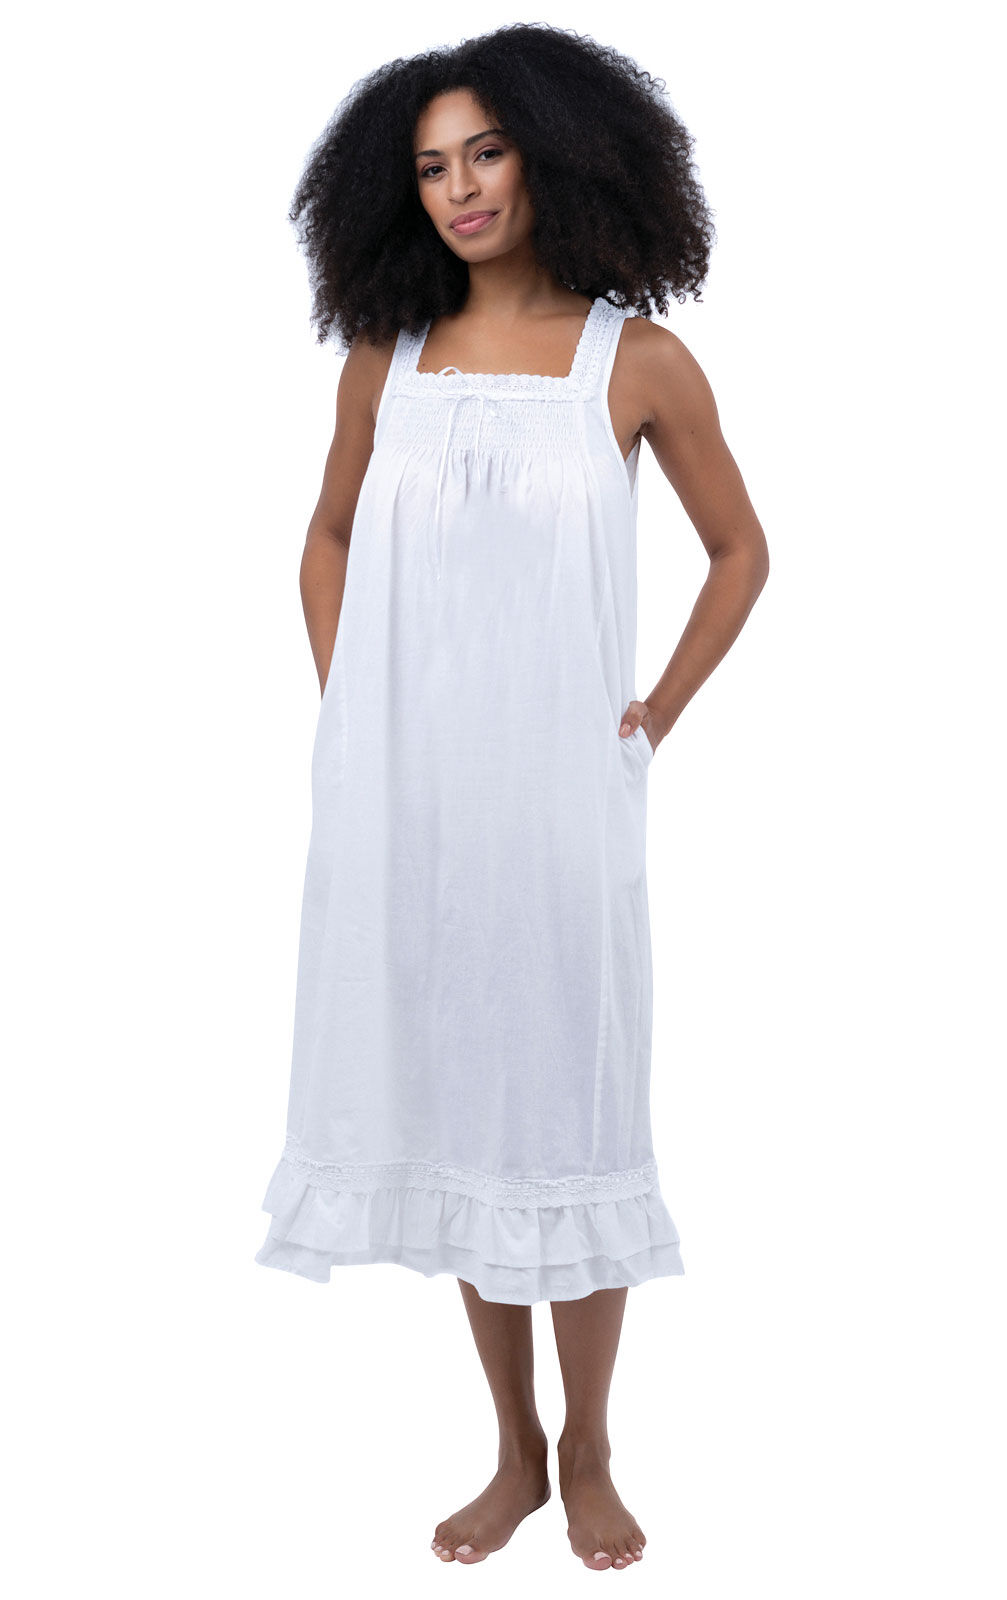 Evelyn "White" Size Medium The 1 For U 100% Cotton Nightdress 